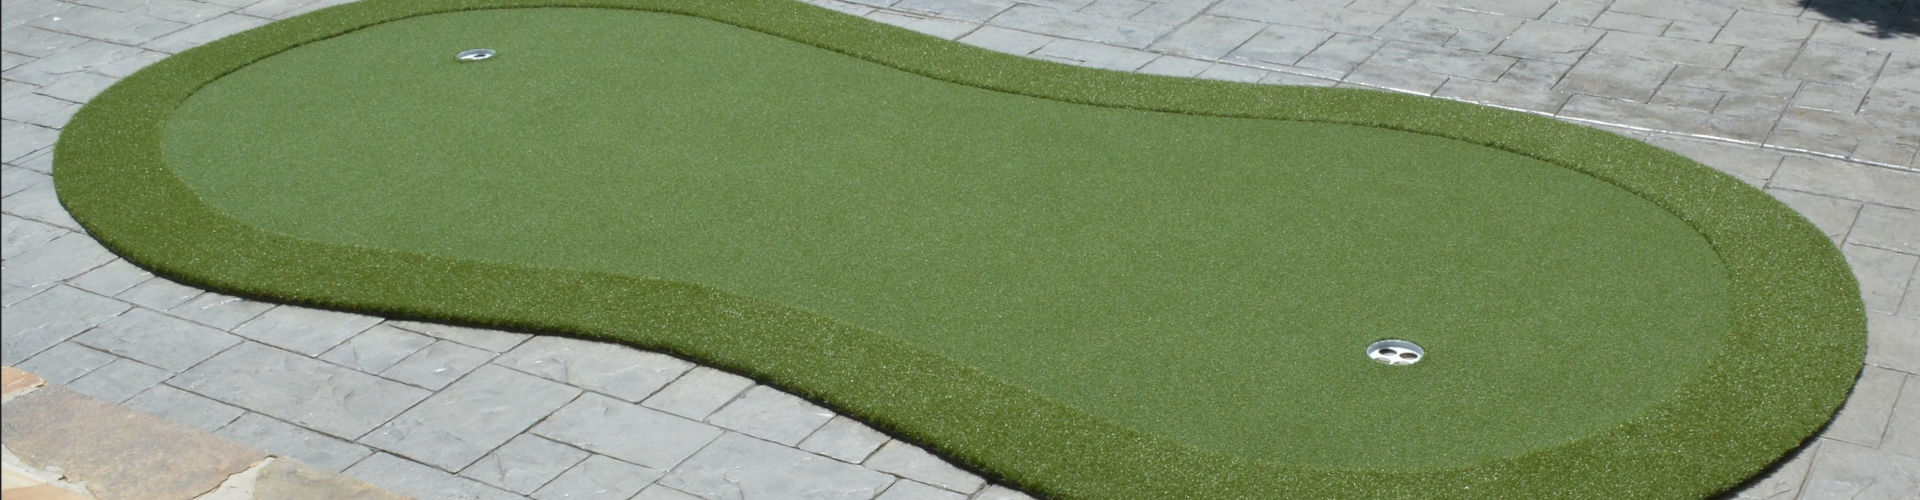 Southwest Greens of Austin Portable Putting Green